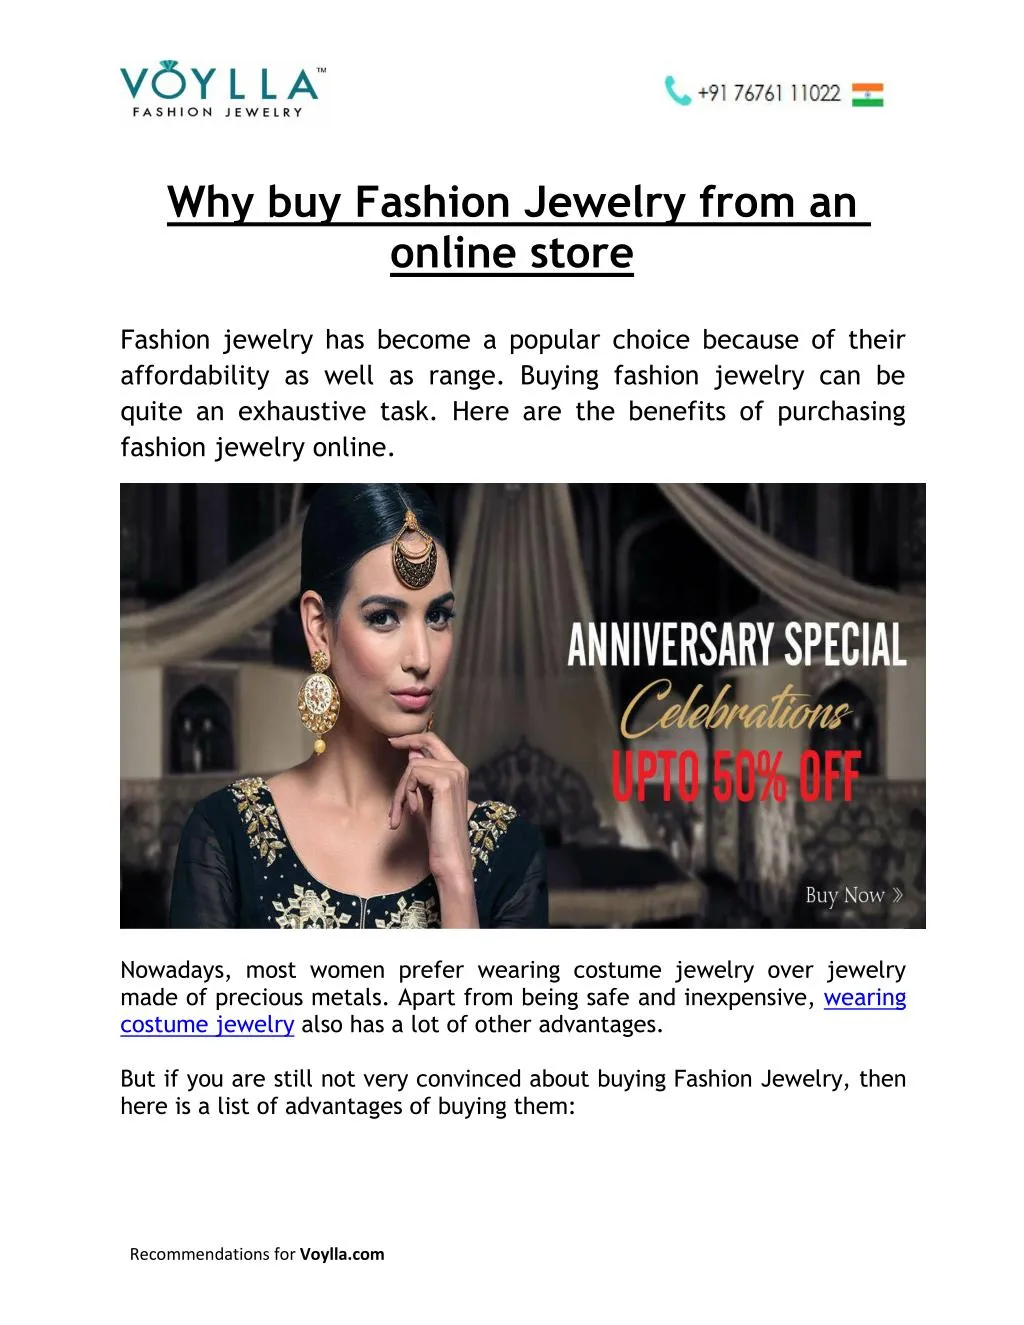 why buy fashion jewelry from an online store